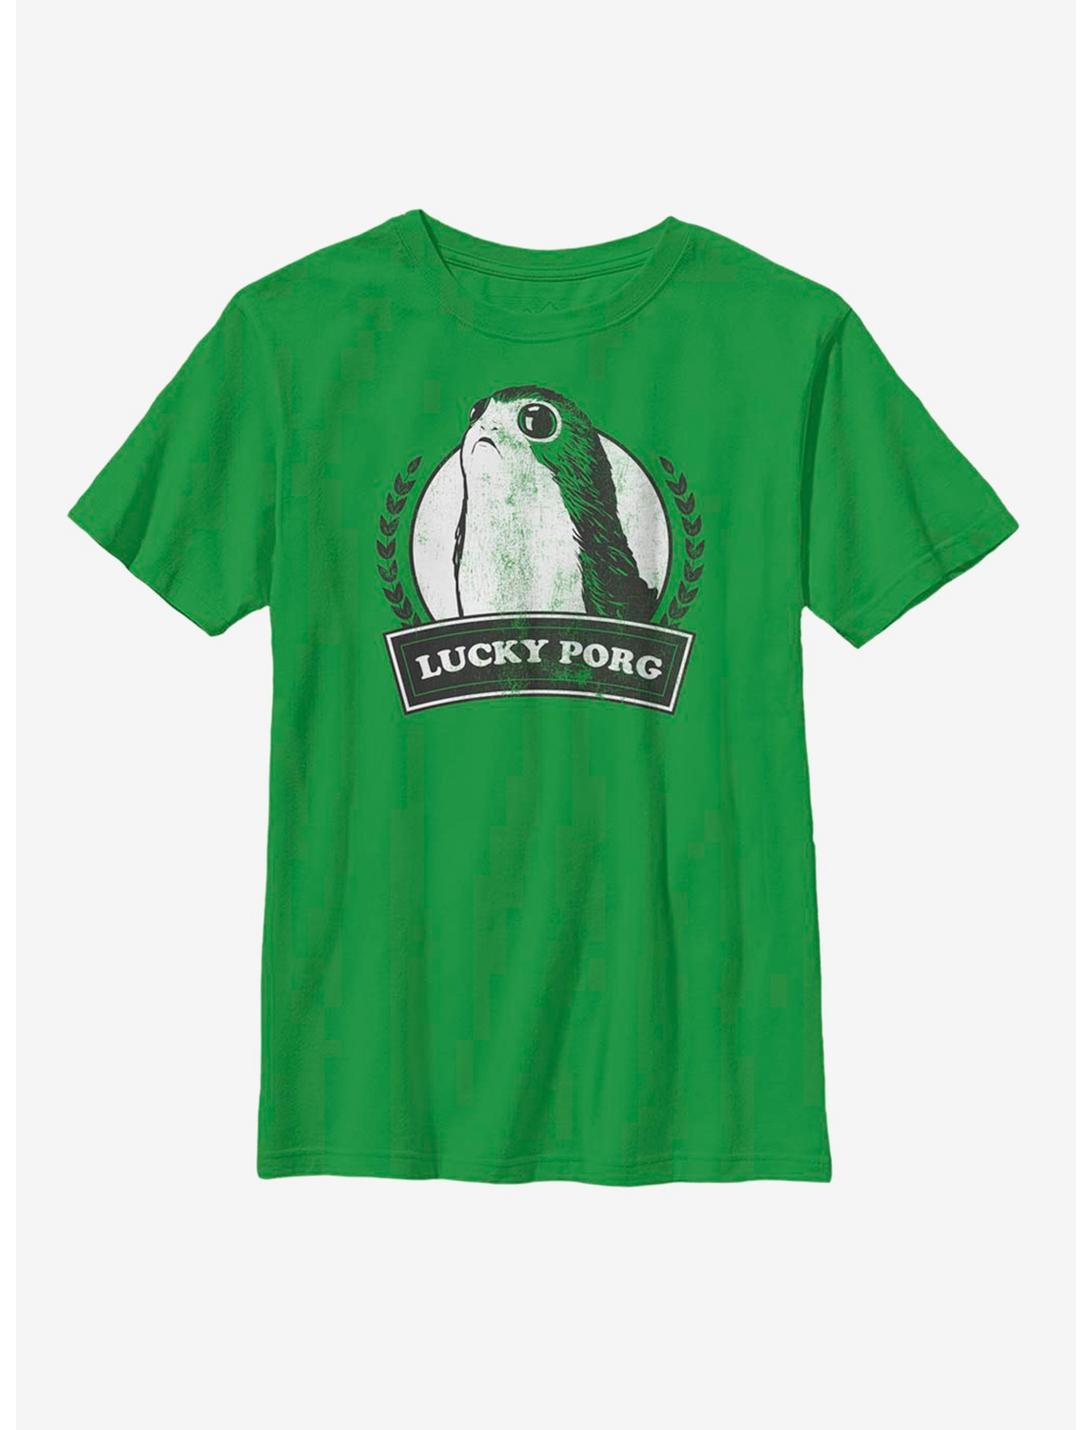 Star Wars Lucky Porg Youth T-Shirt, KELLY, hi-res